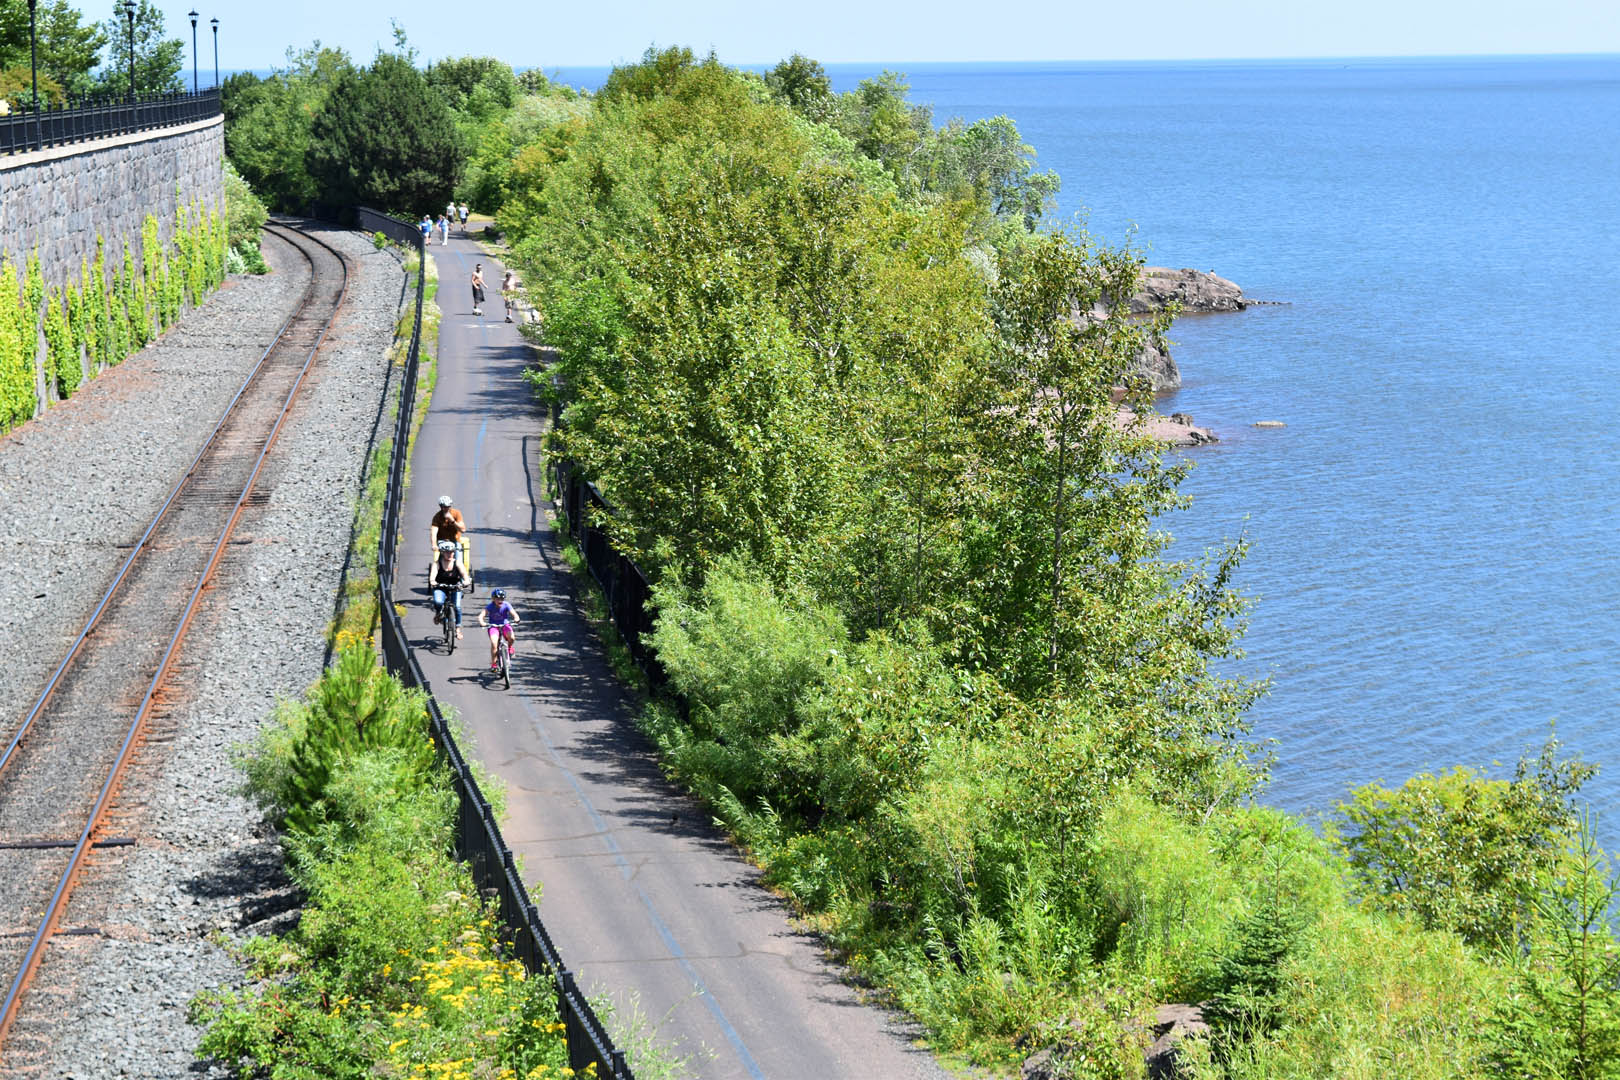 Looking down from above at bikers and walkers on the Duluth Lakewalk with green trees and a very blue lake superior